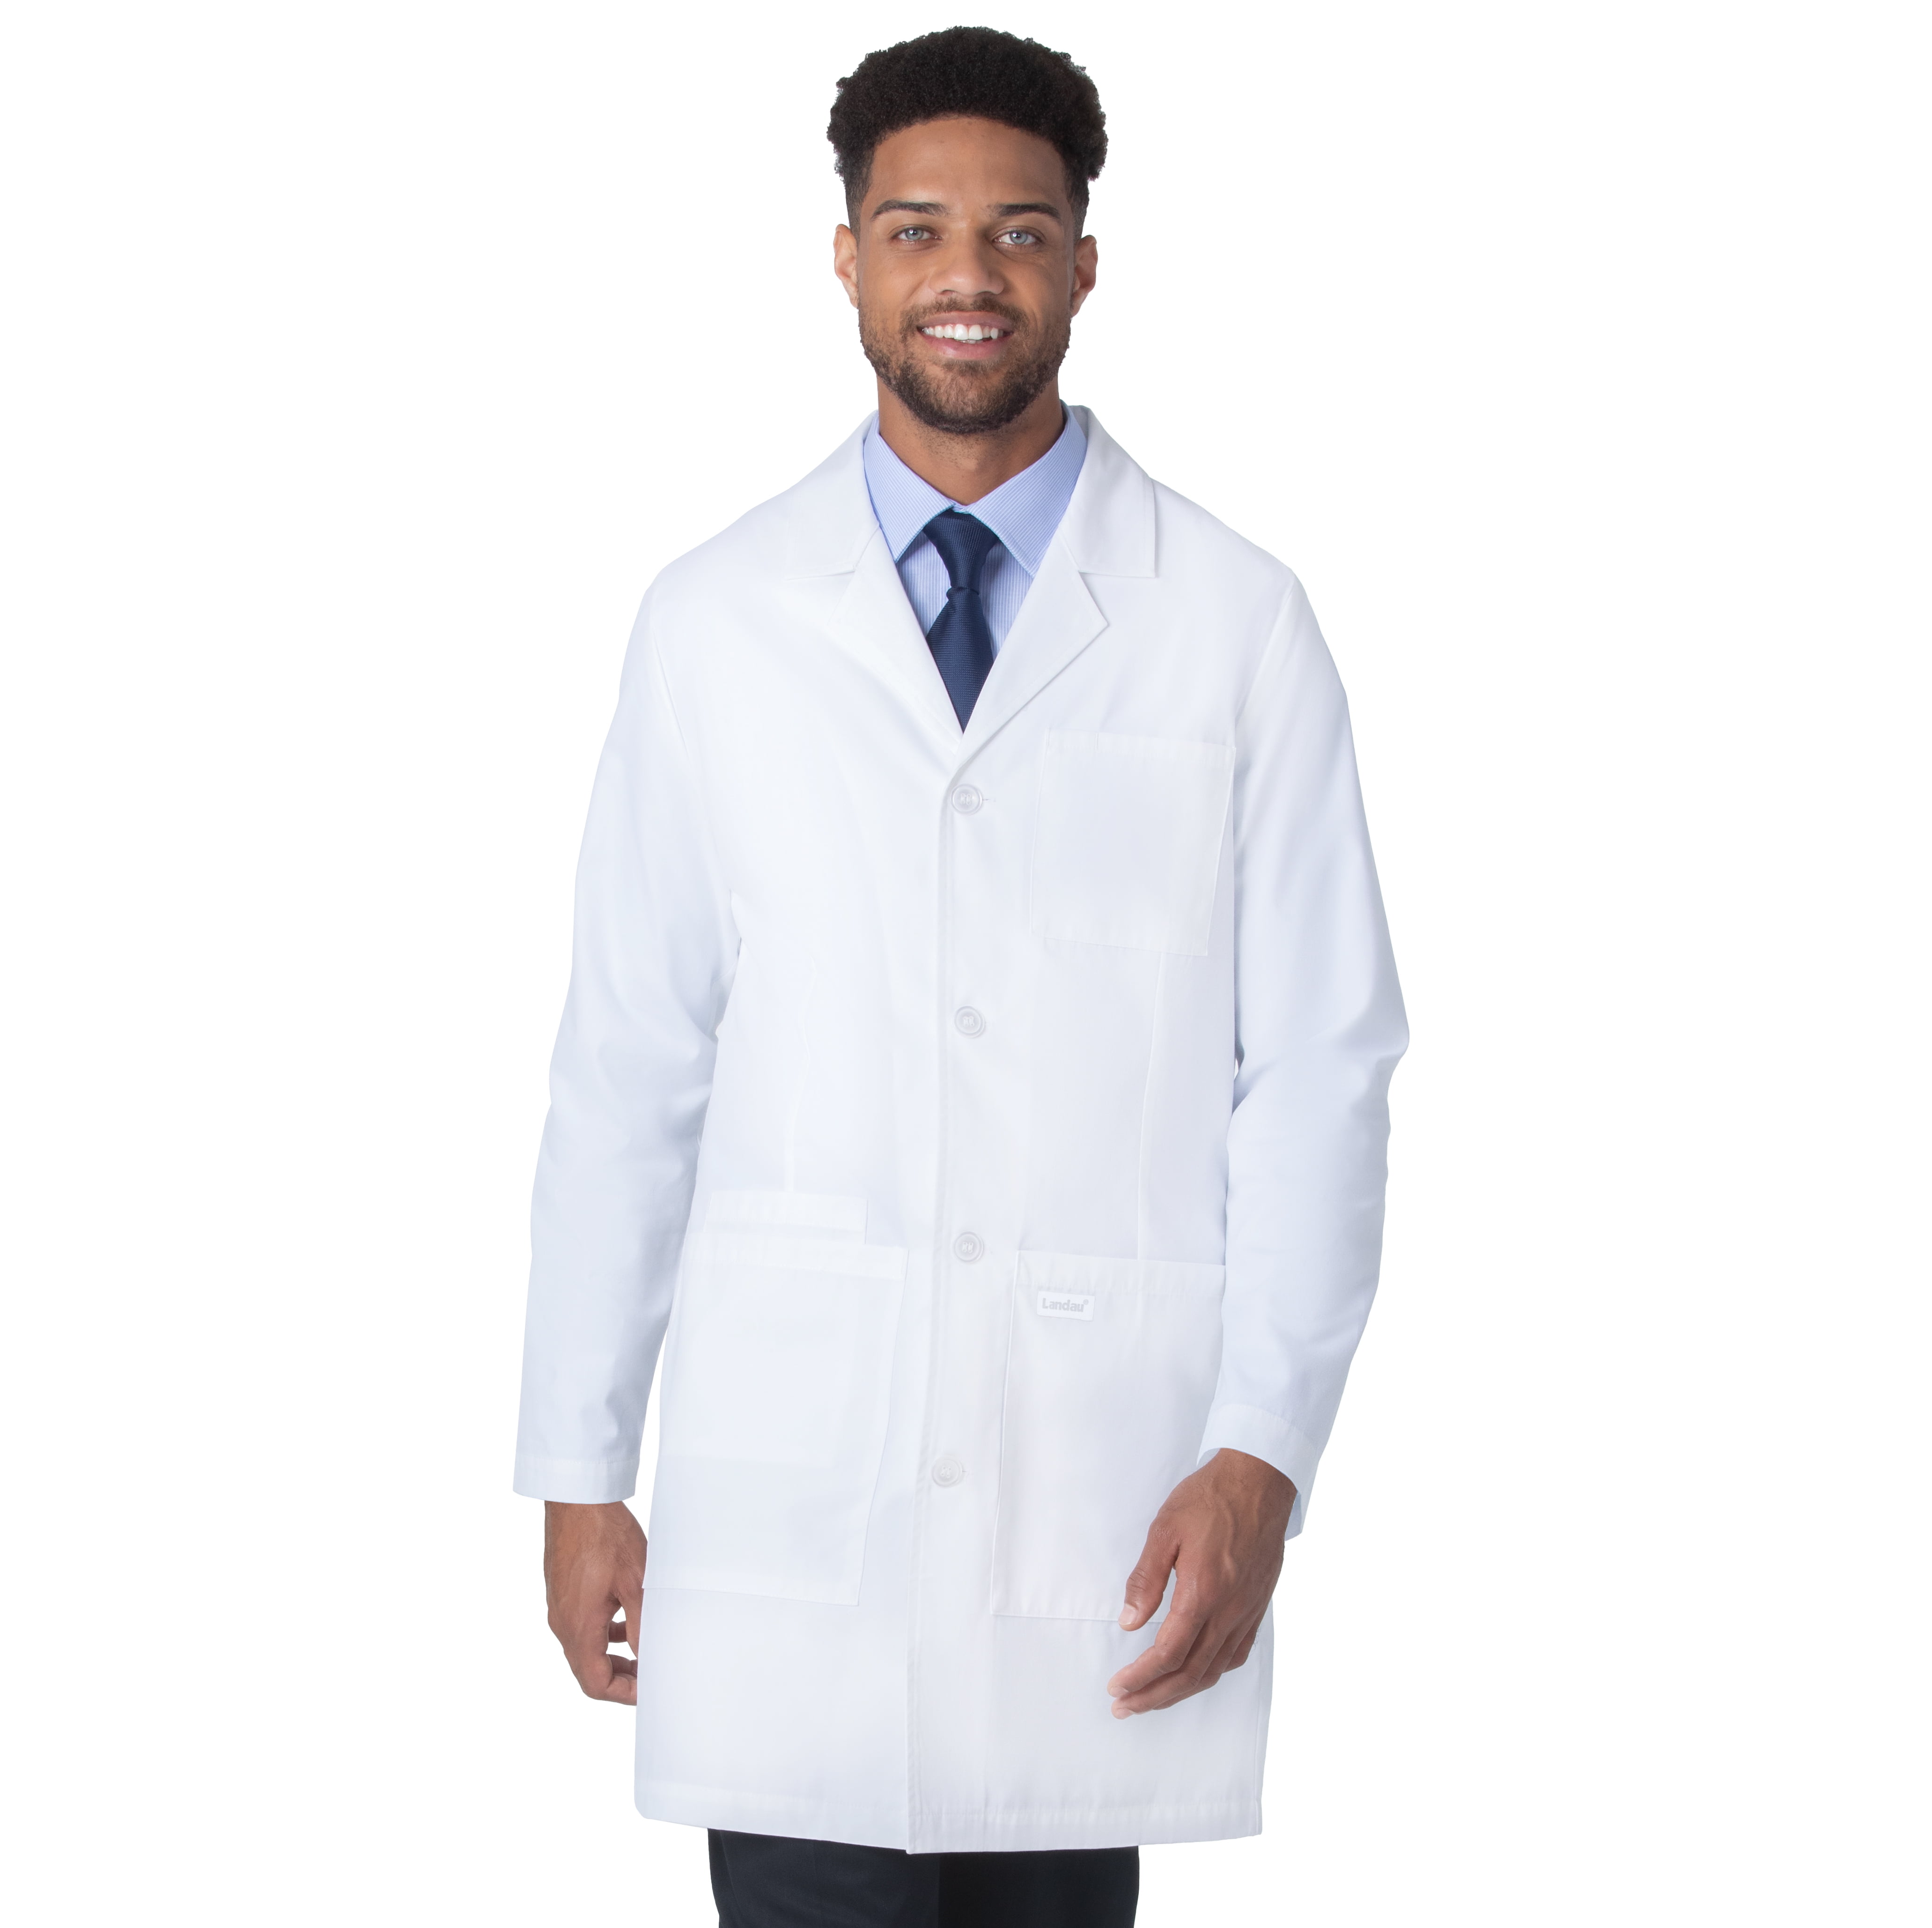 oldersmarterfit - Lab coat over shirt that's over pants x 4. Ready for the  week. . Need to stay on my A-game as one thoughtless eye or nose rub, or  forgetting to